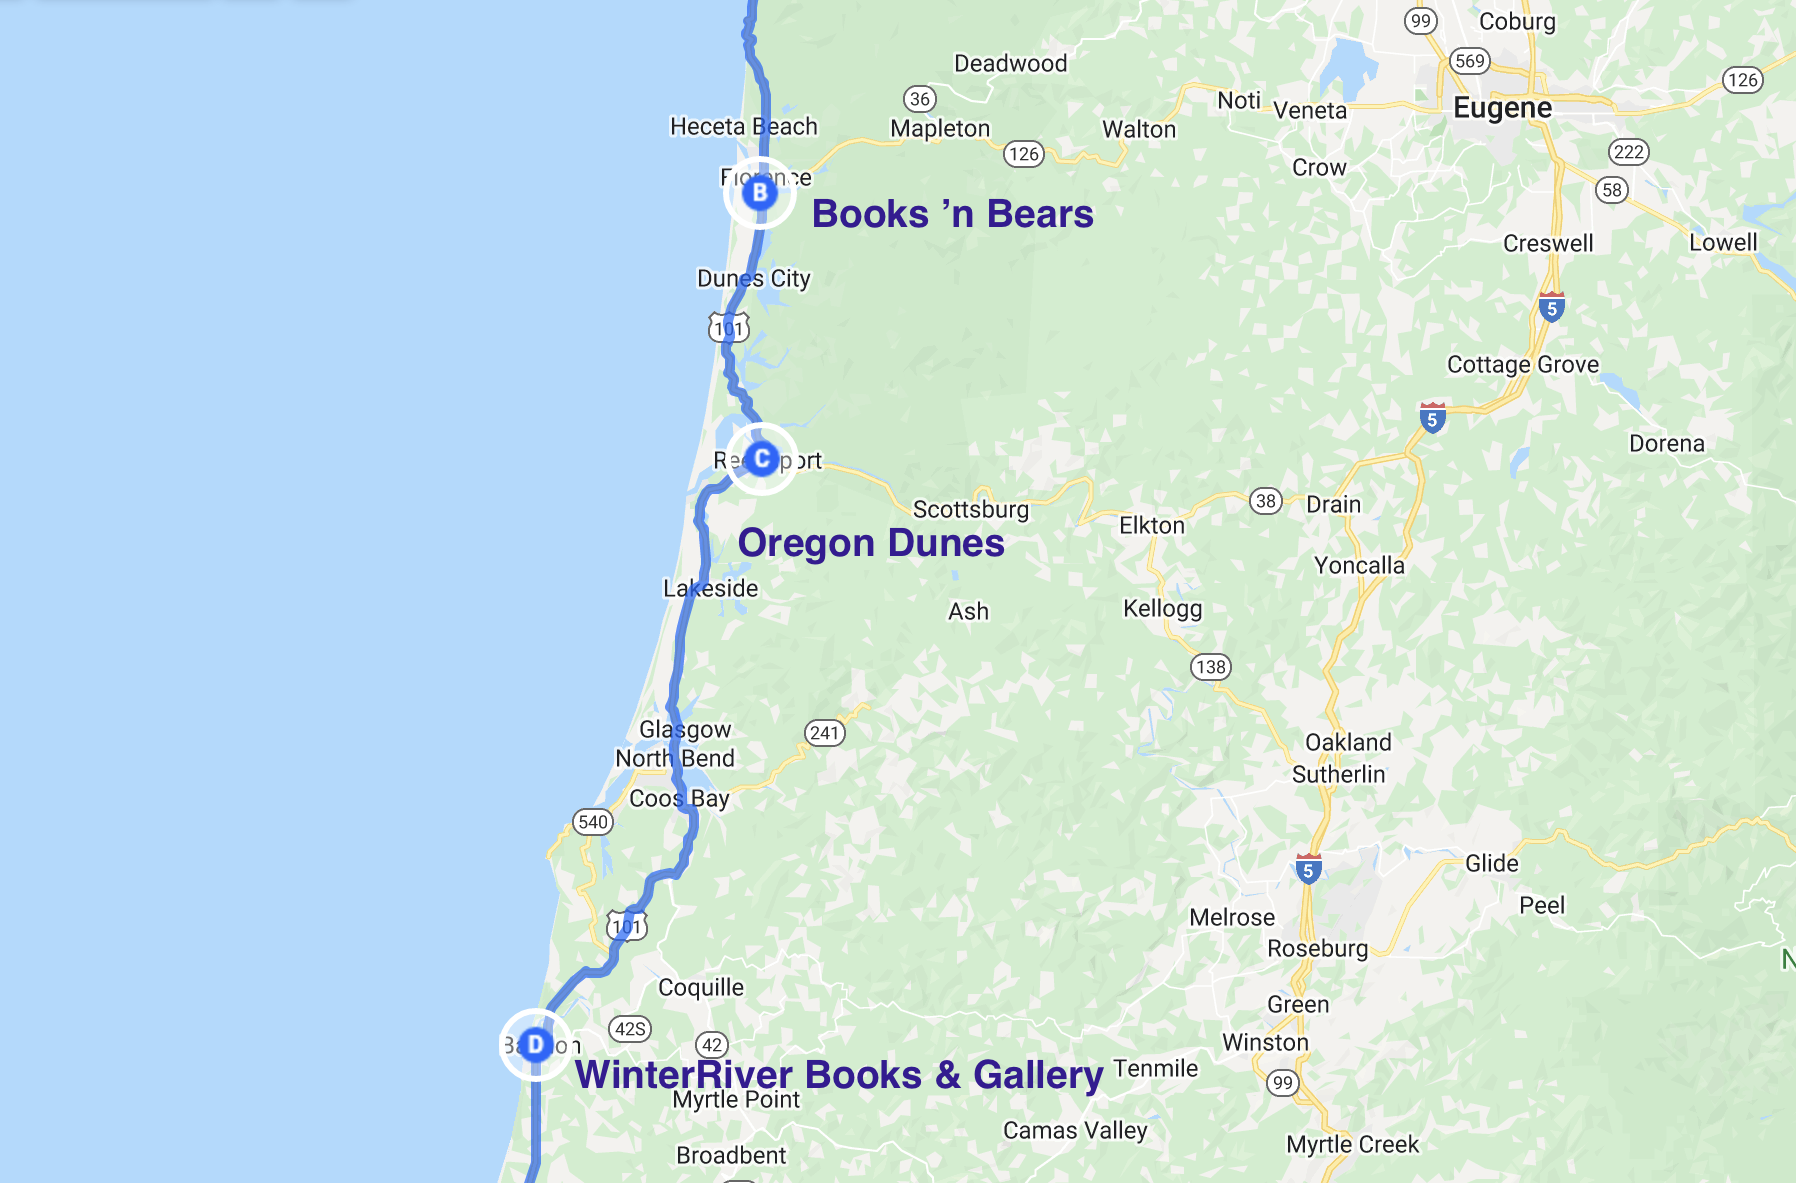 map of literary stops that include the cities of Florence and Bandon as well as the Oregon Dunes 